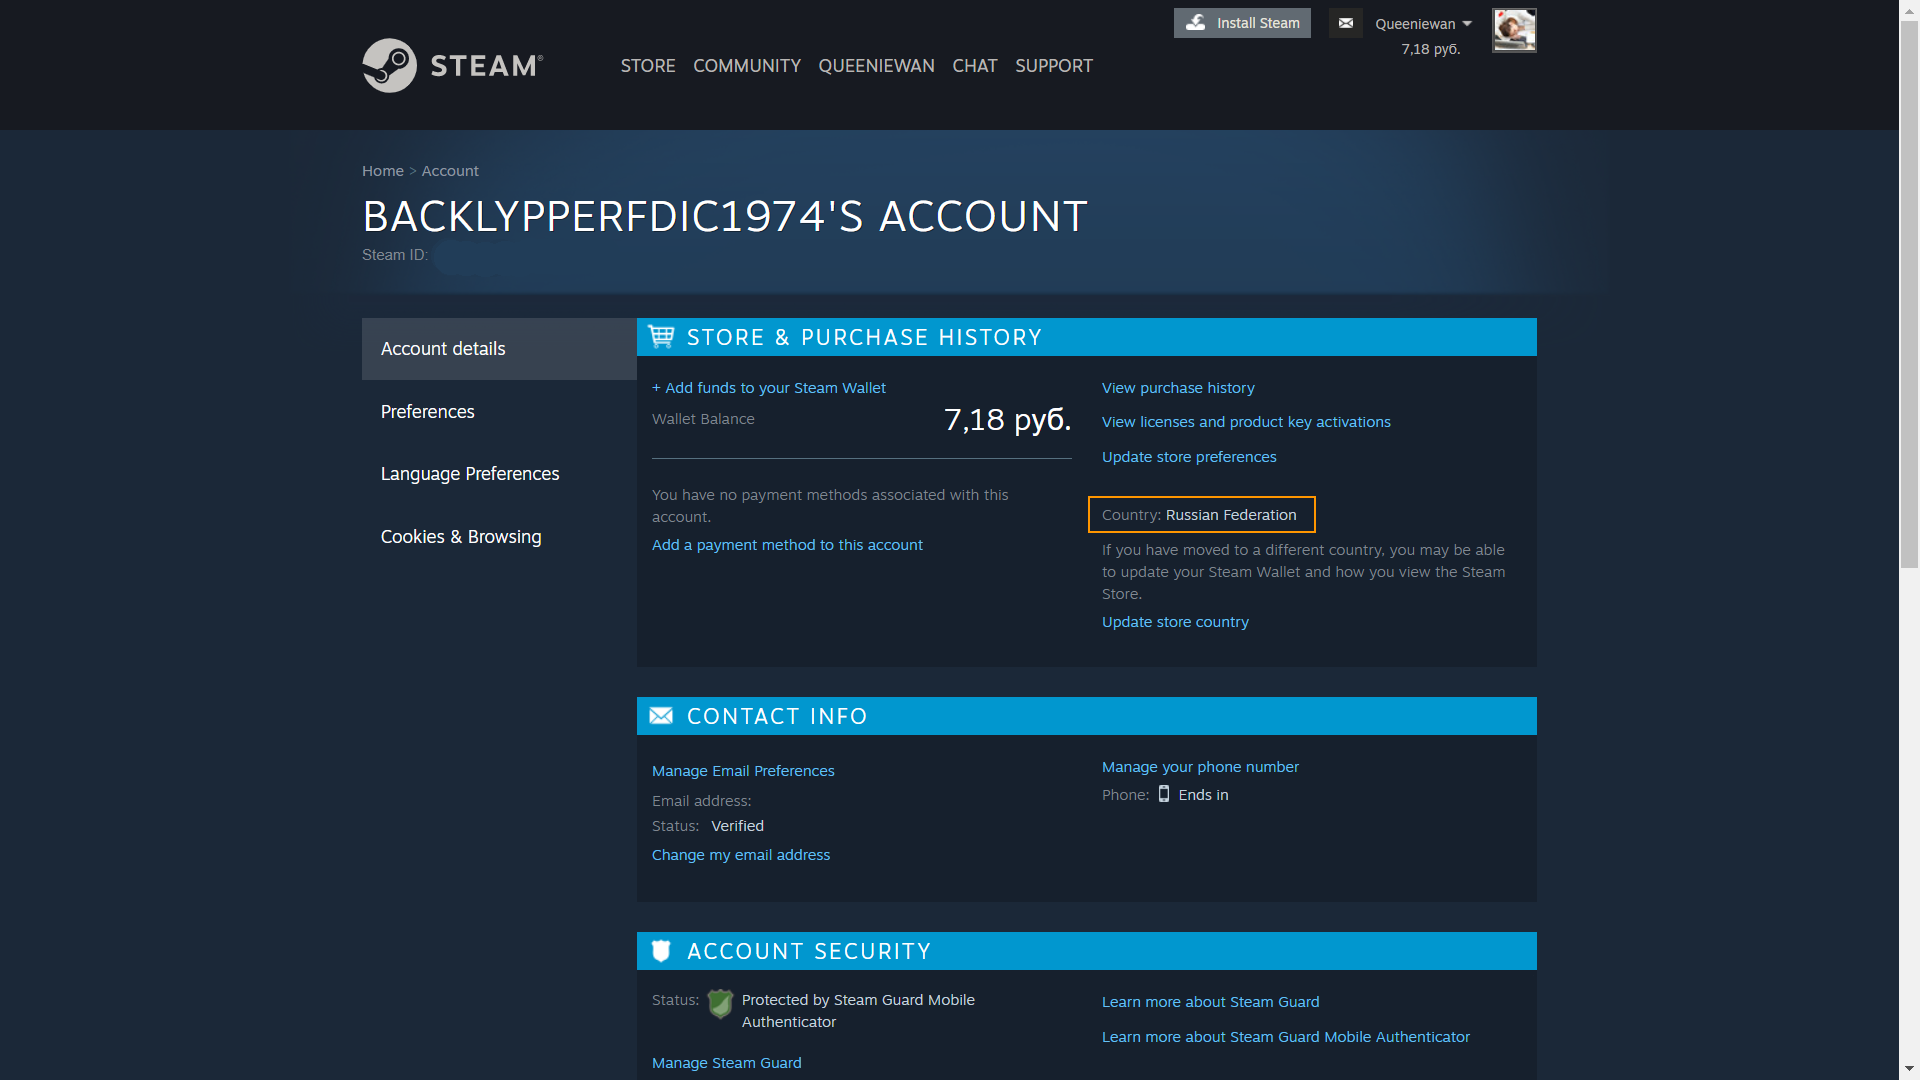 The steam mobile authenticator фото 69